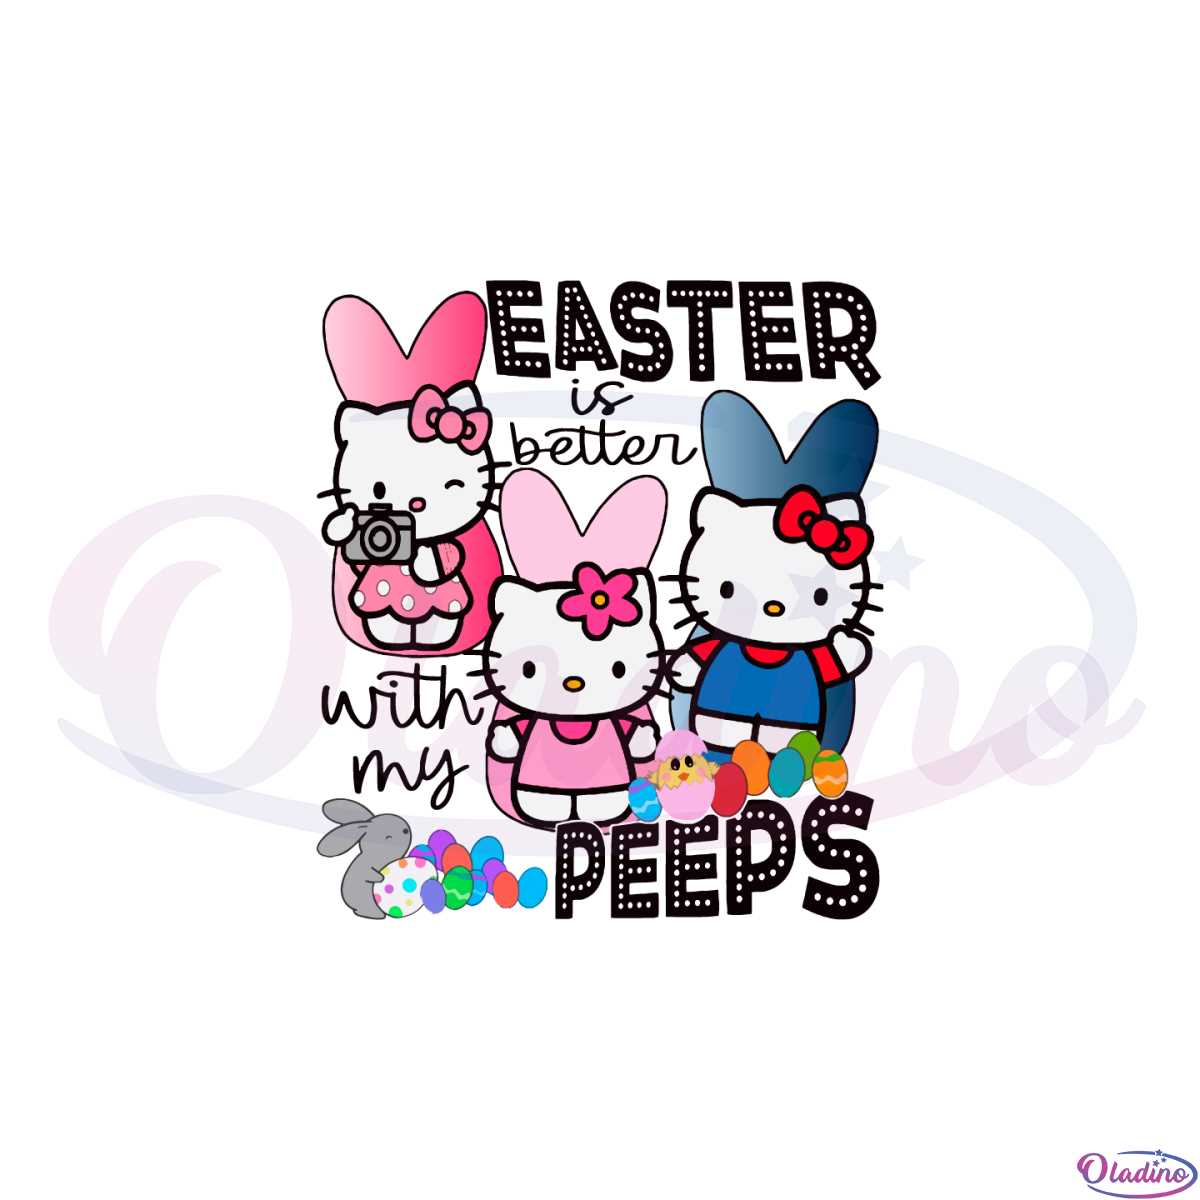 easter-is-better-with-my-peeps-hello-kitty-easter-peeps-svg